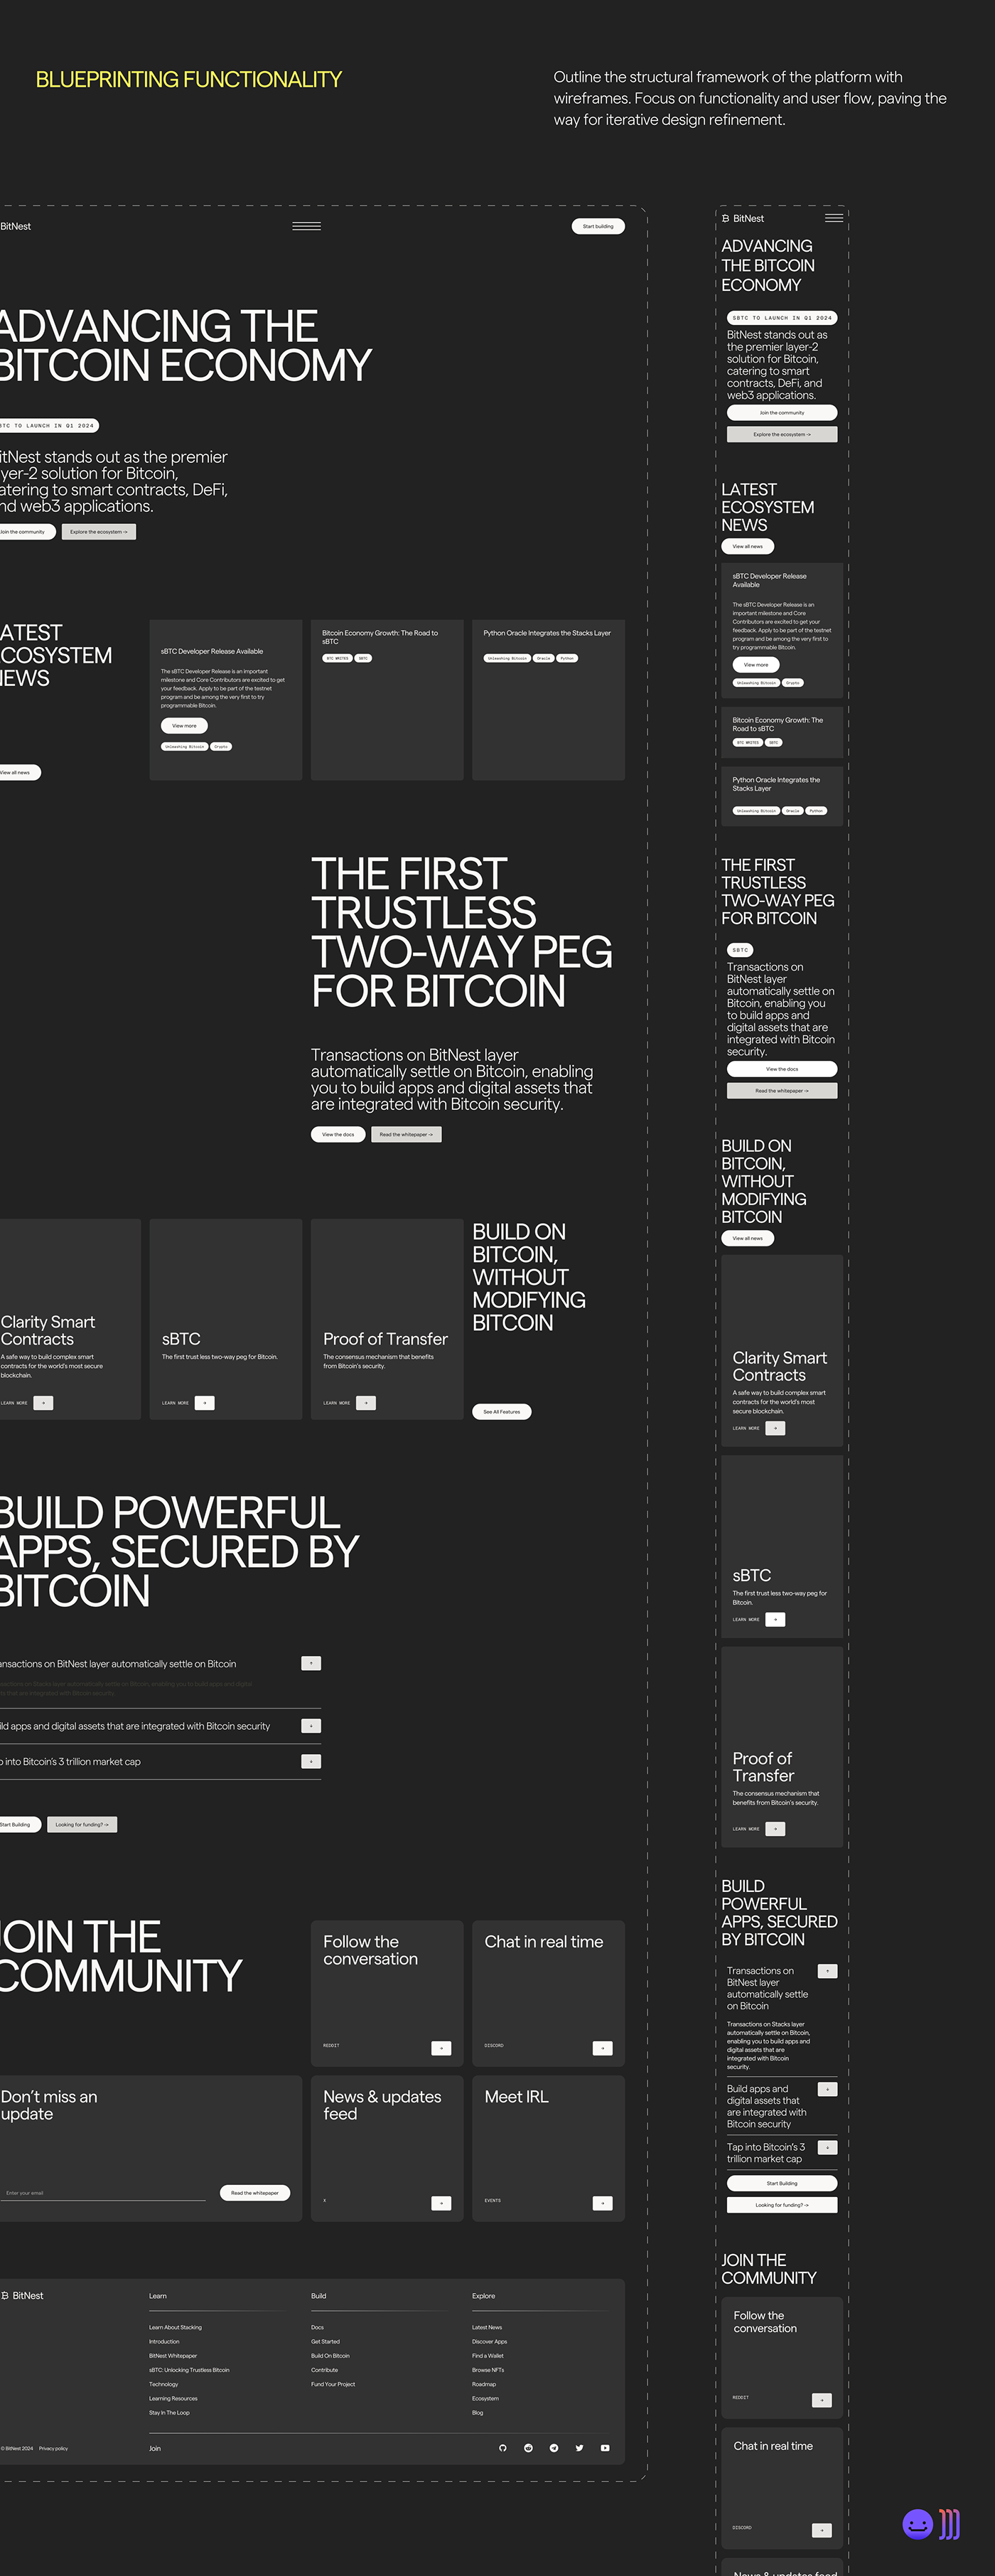 Wireframes for a website UI/UX design for higher conversions. For a crypto platform.